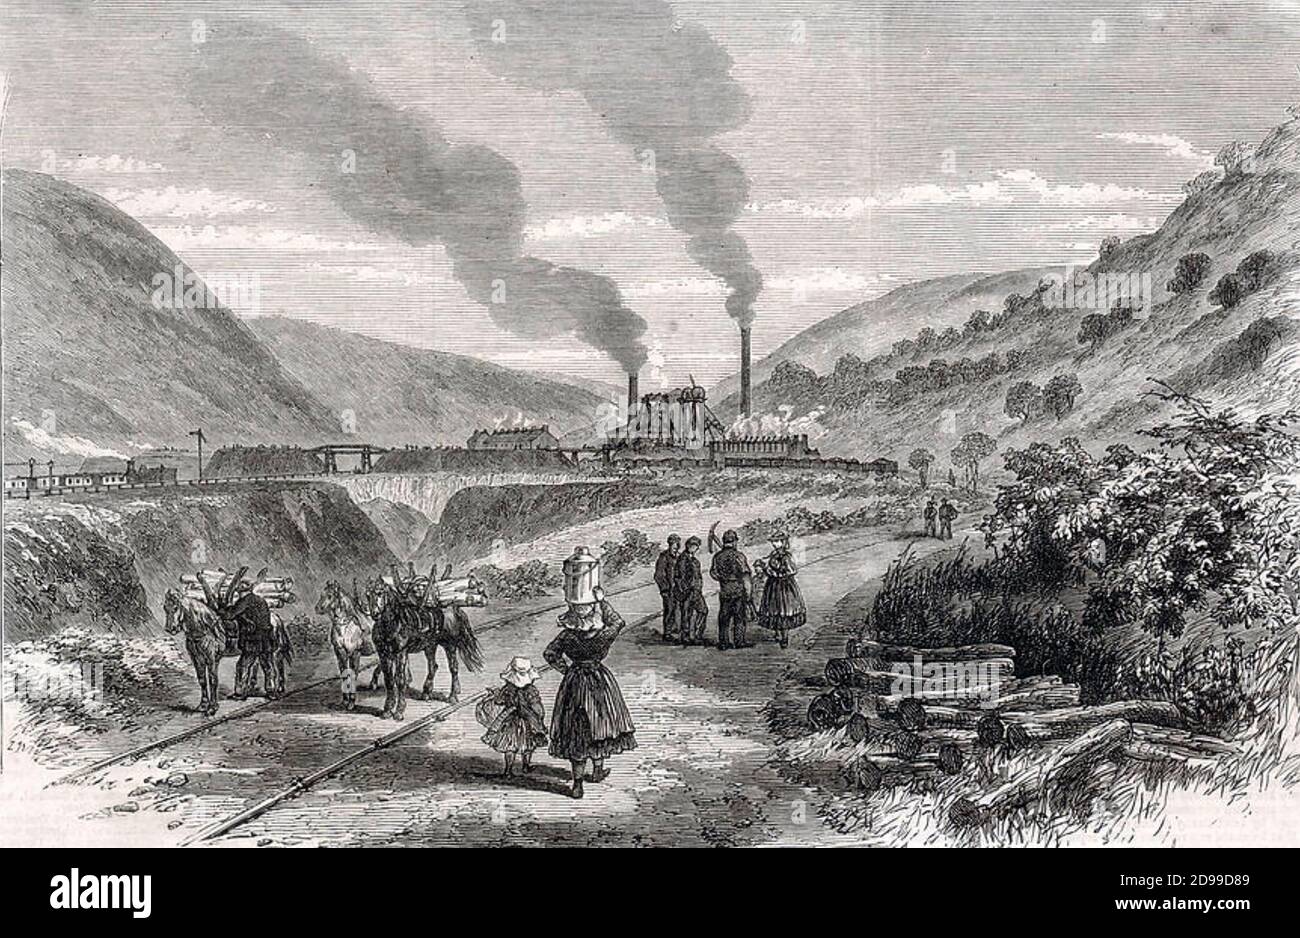 BEDWELLTY COAL PITS, Monmouthshire,South Wales in 1865 Stock Photo